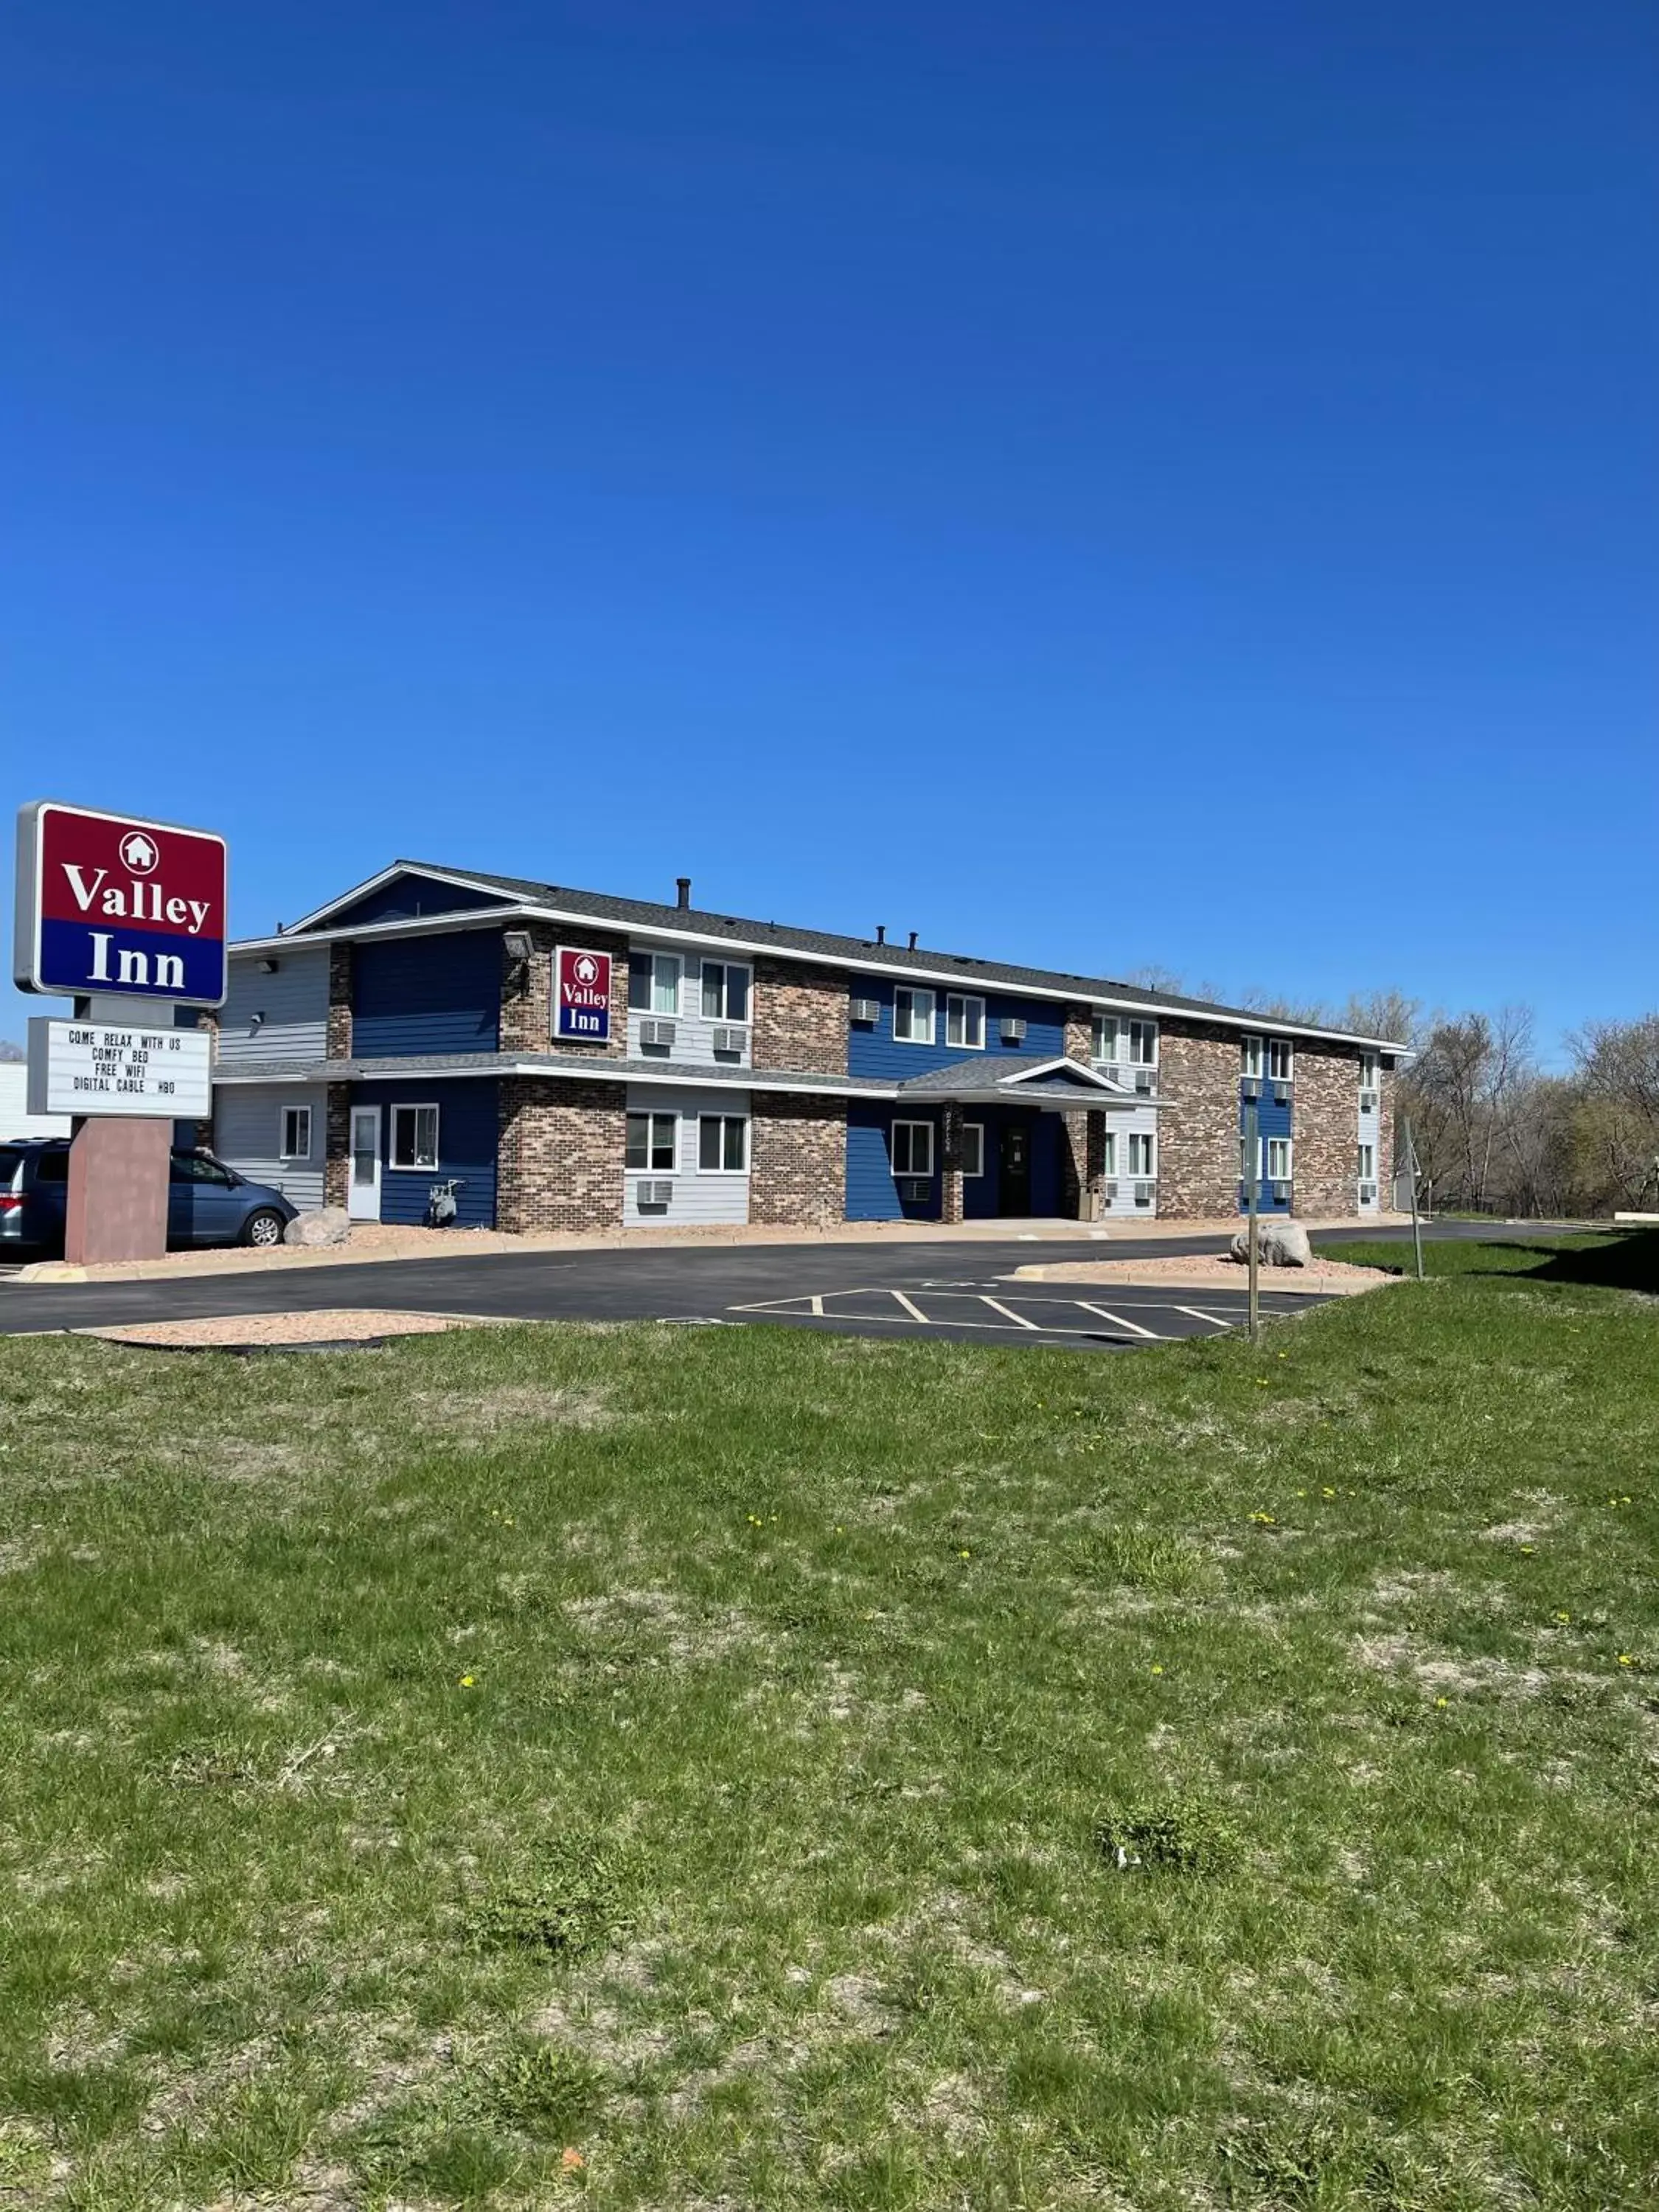 Property Building in Valley Inn Shakopee